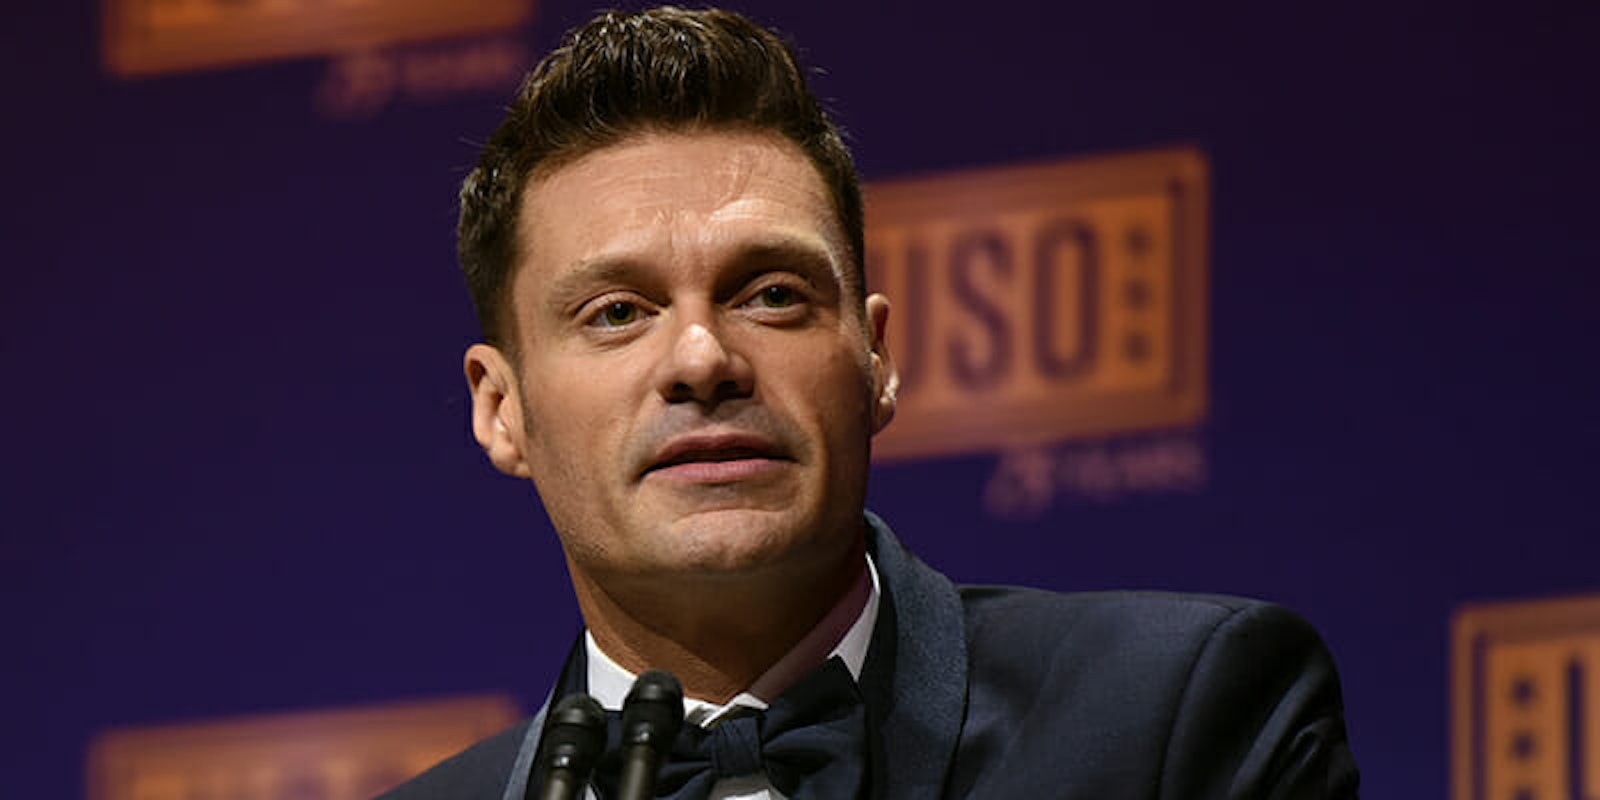 A woman says Ryan Seacrest sexually harassed and assaulted her while she was his stylist.